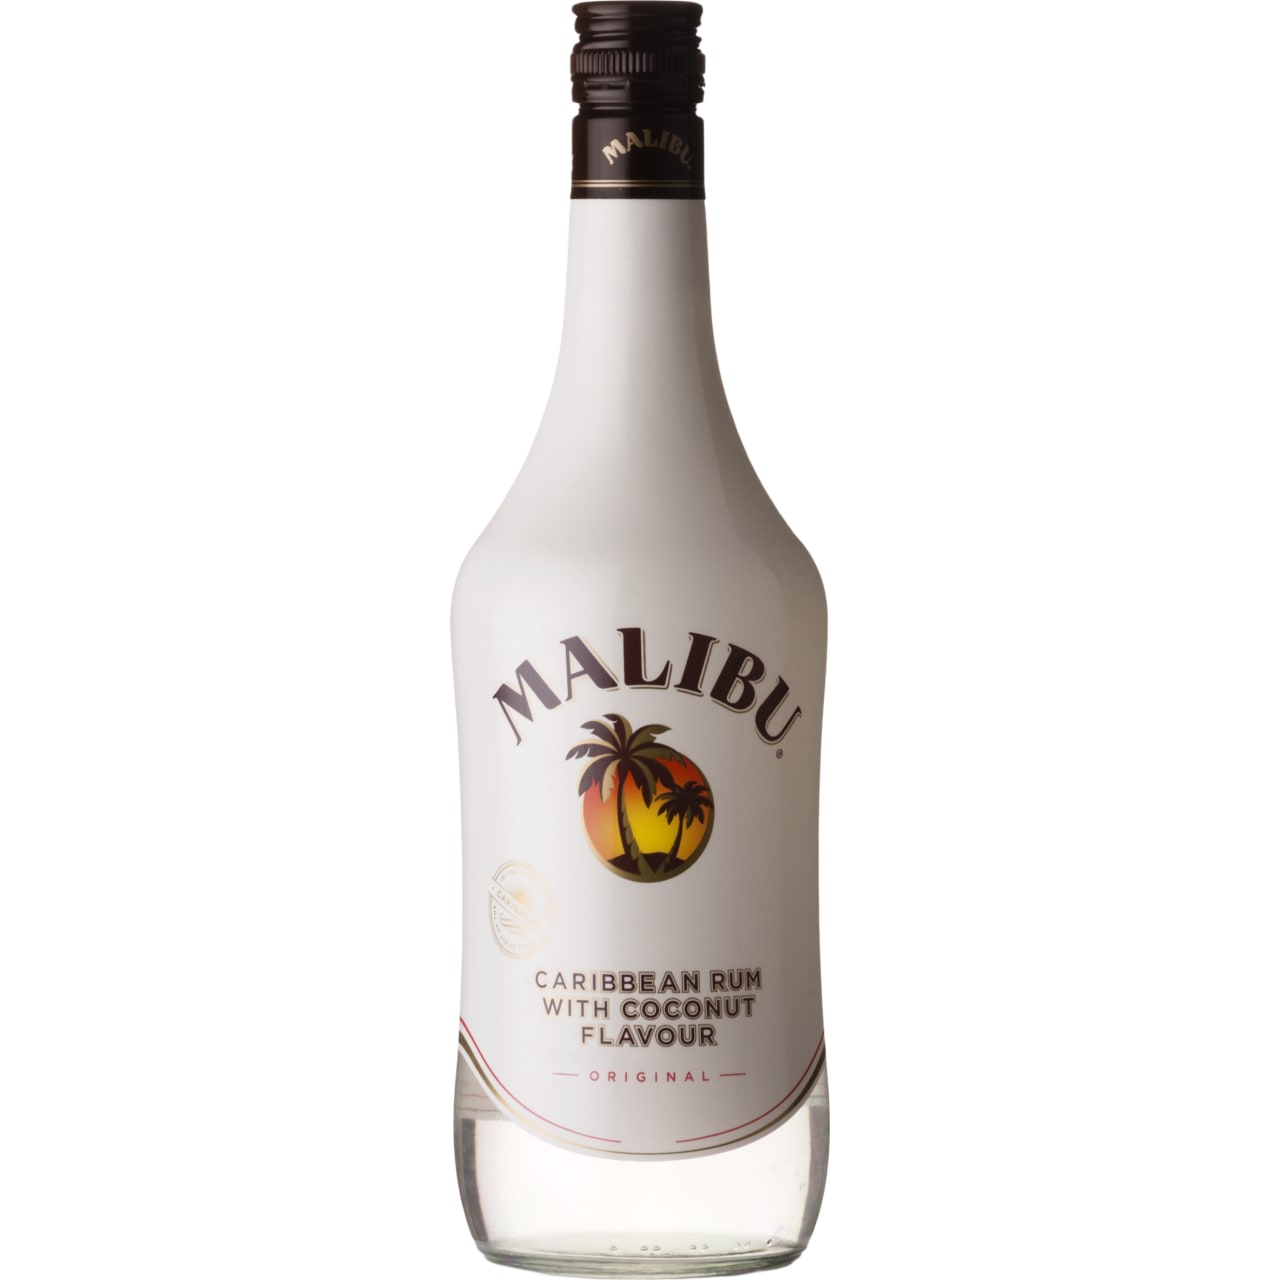 Created in Barbados, Malibu Caribbean White Rum is the world’s best selling rum. Made with natural coconut flavour, Malibu is smooth and fresh with a sweet taste.